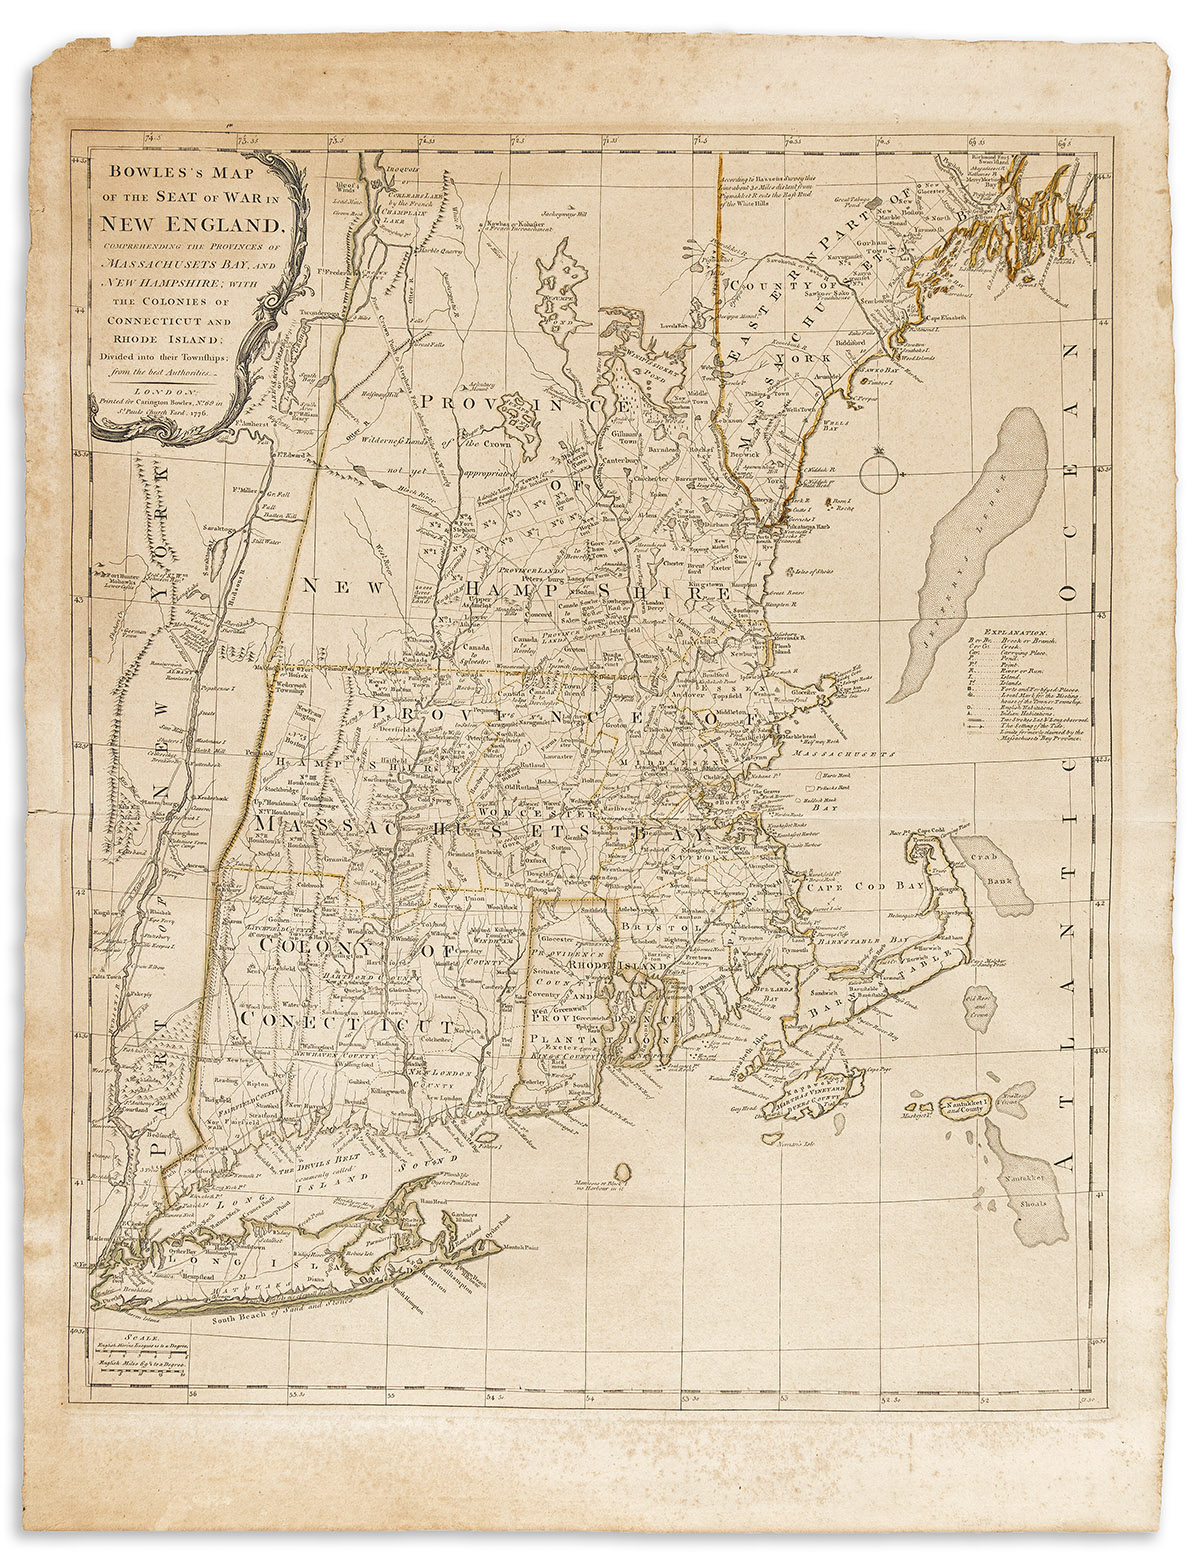 (NEW ENGLAND.) Carington Bowles. Bowless Map of the Seat of War in New England,